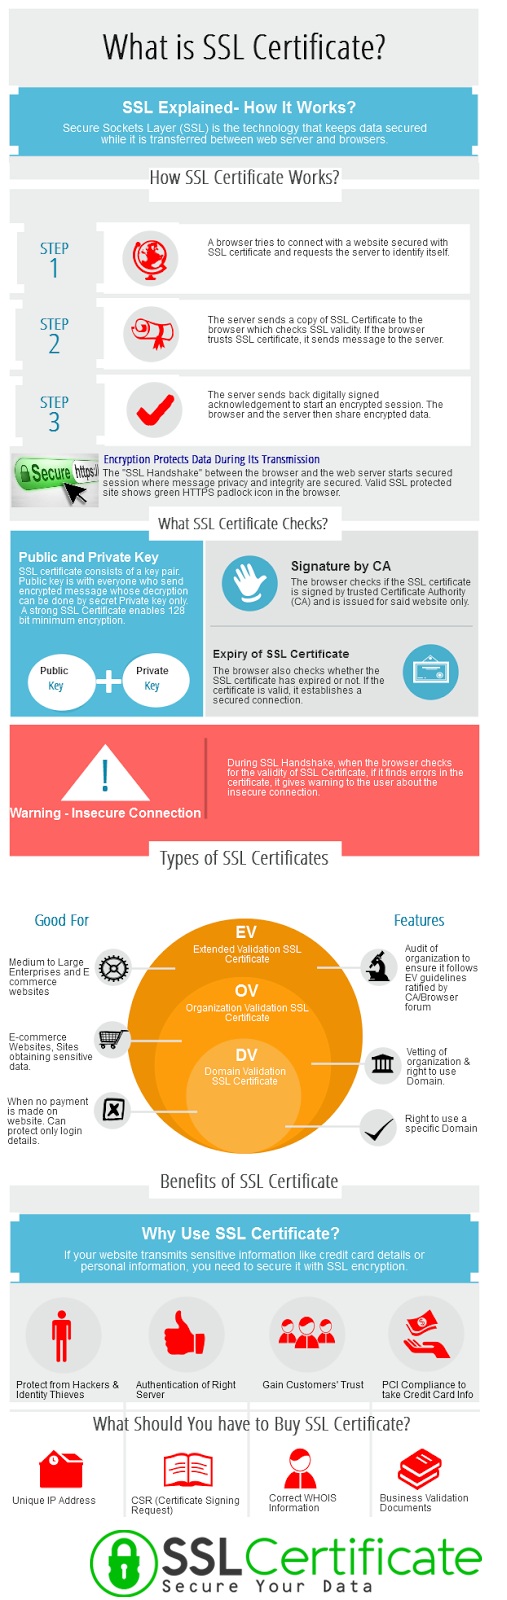 everything you need to know about SSL Certificates